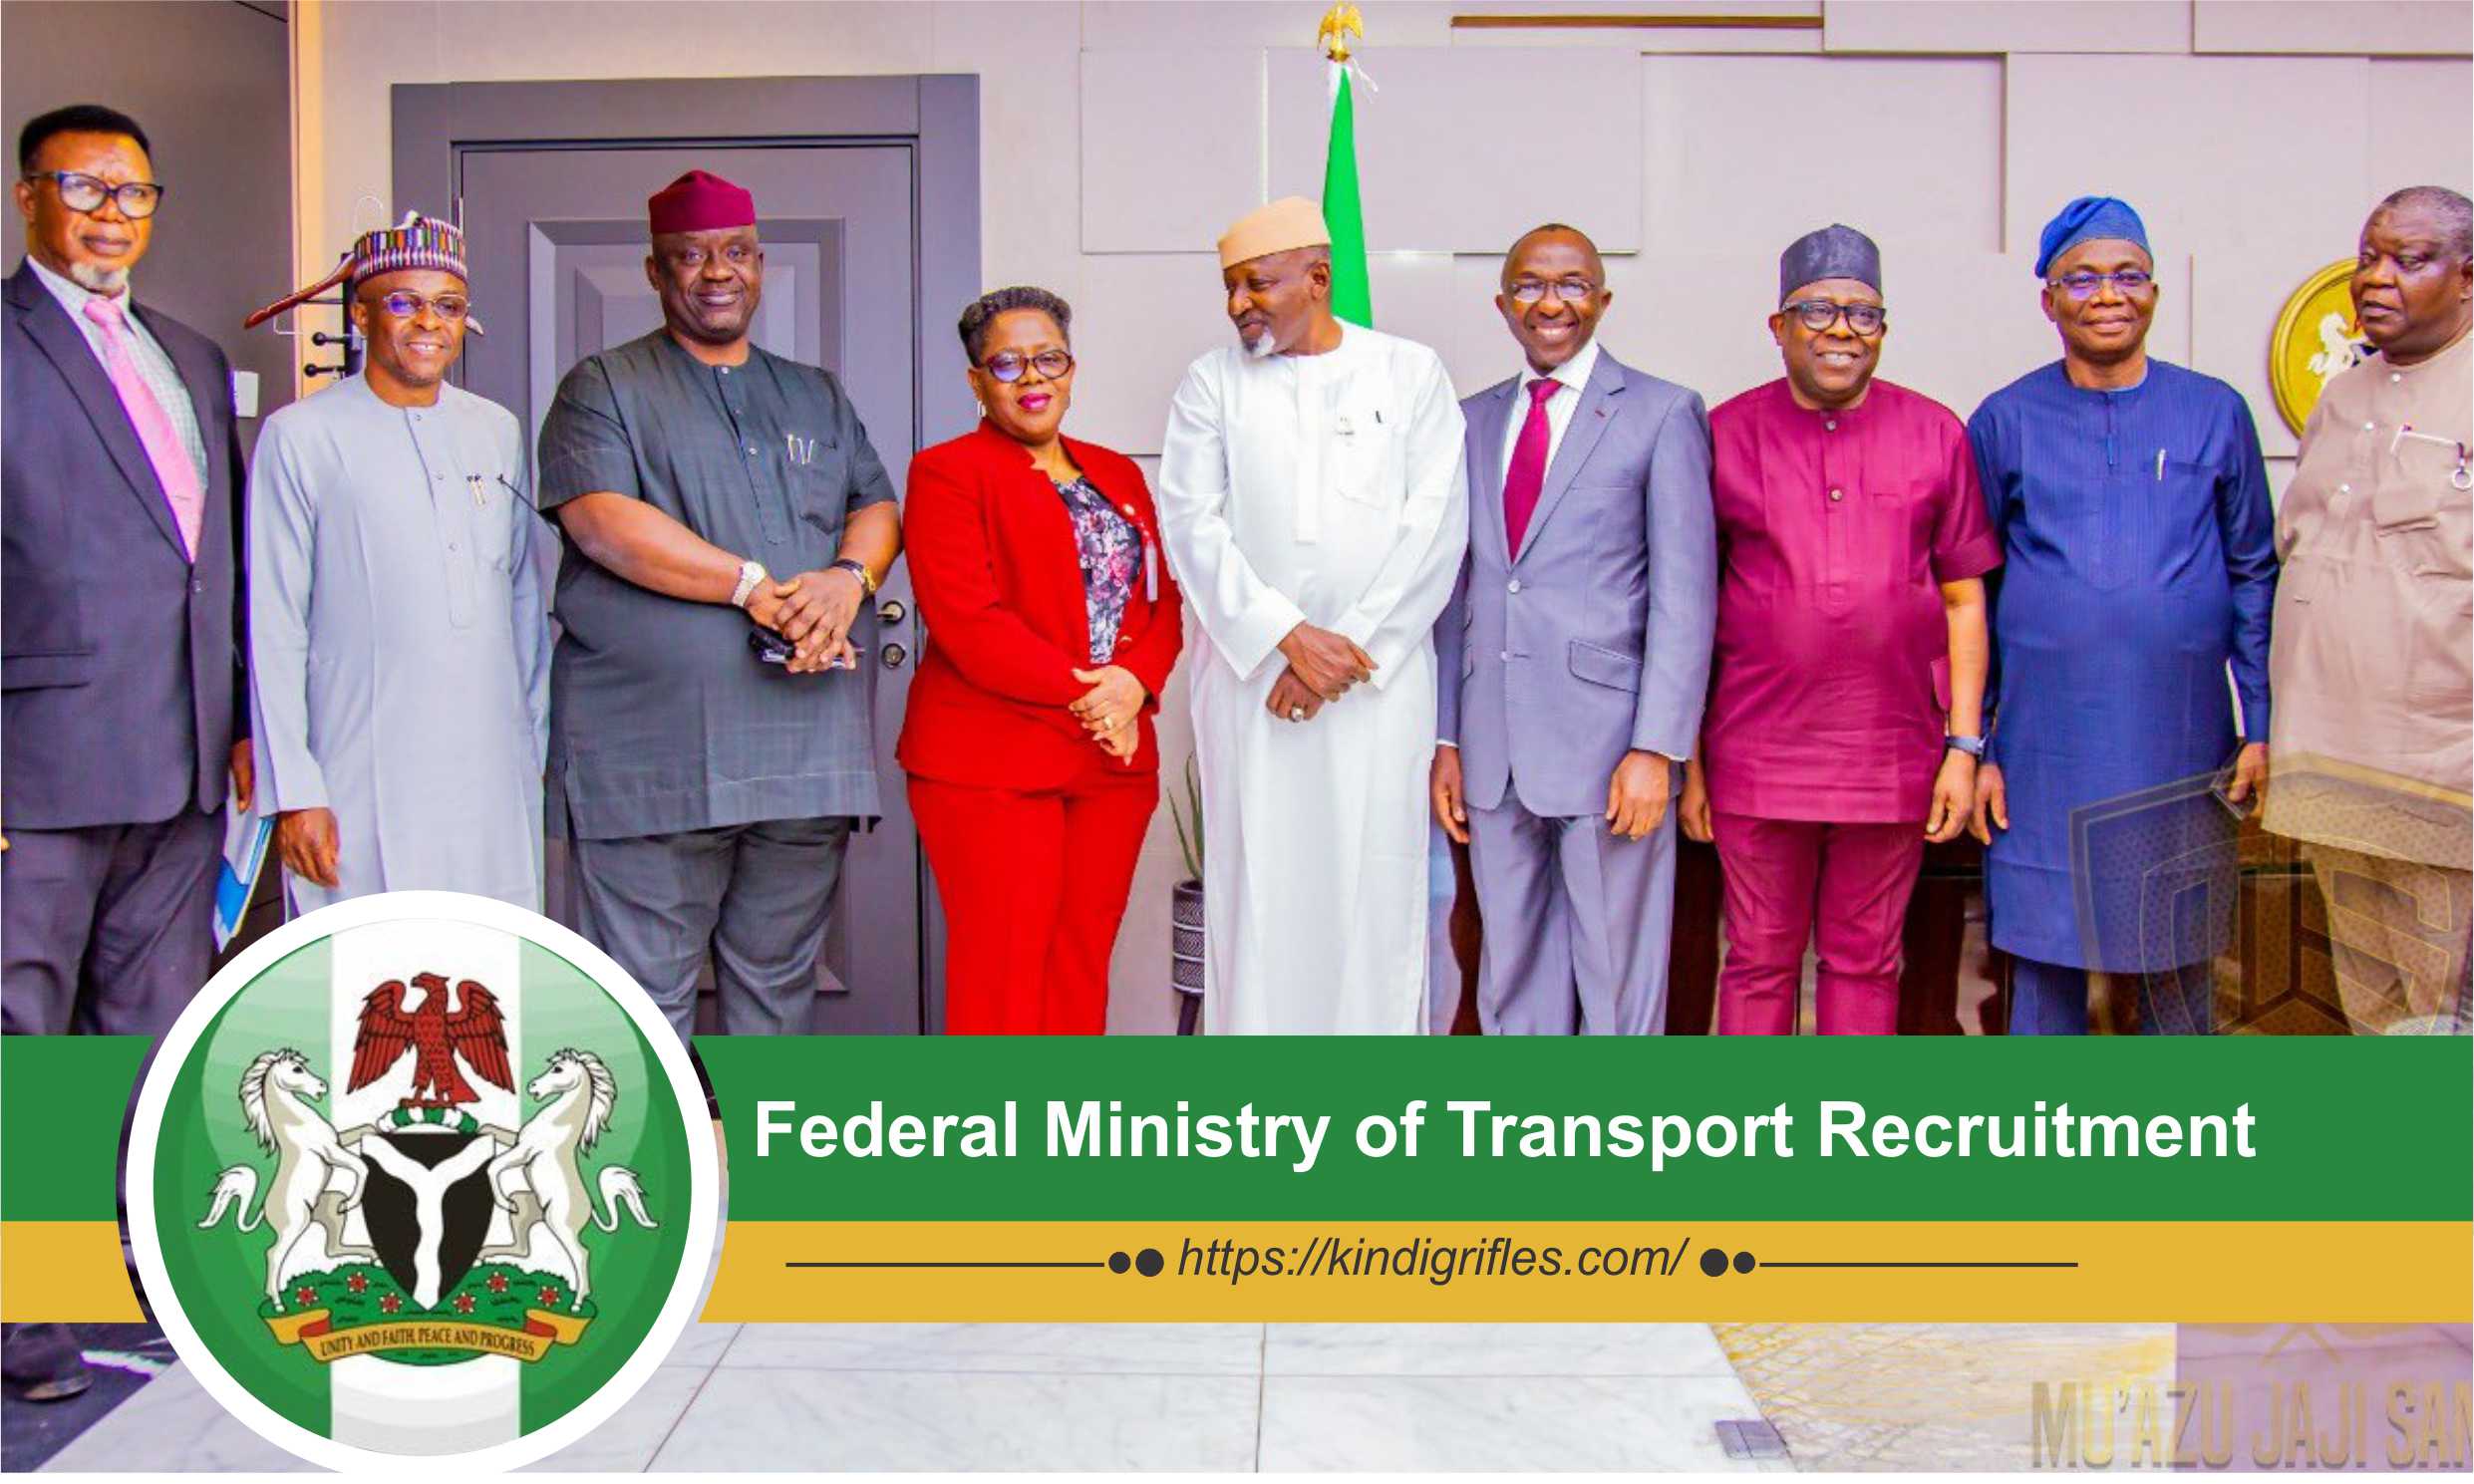 Federal Ministry of Transport Recruitment